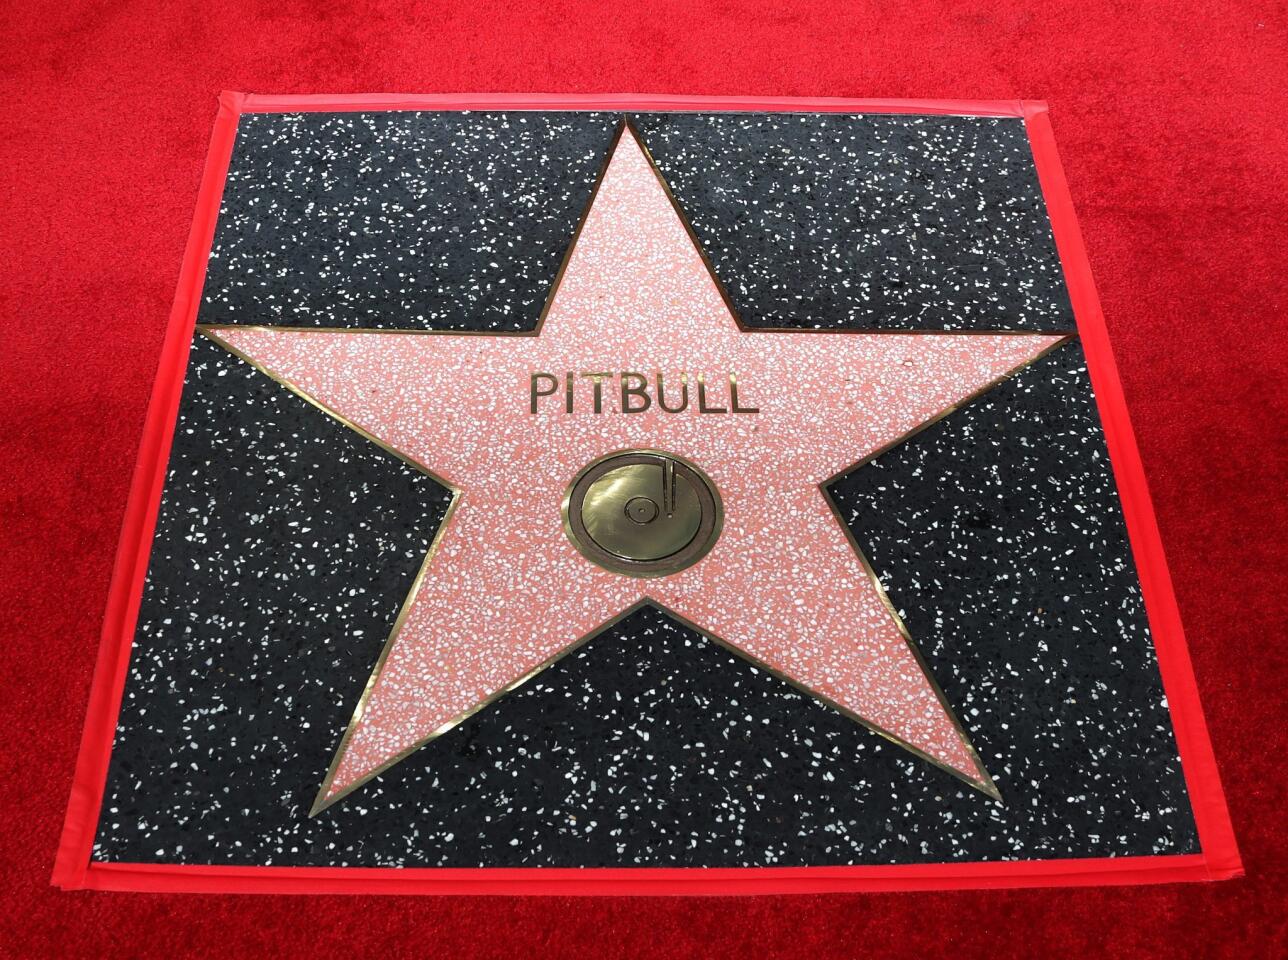 MAN06. Hollywood (United States), 15/07/2016.- The star for Cuban-American singer Pitbull is pictured after a ceremony honoring him on the Hollywood Walk of Fame, in Hollywood, California, USA, 15 July 2016. Pitbull received the 2,584th star in the Recording category. (Estados Unidos) EFE/EPA/MIKE NELSON ** Usable by HOY and SD Only **